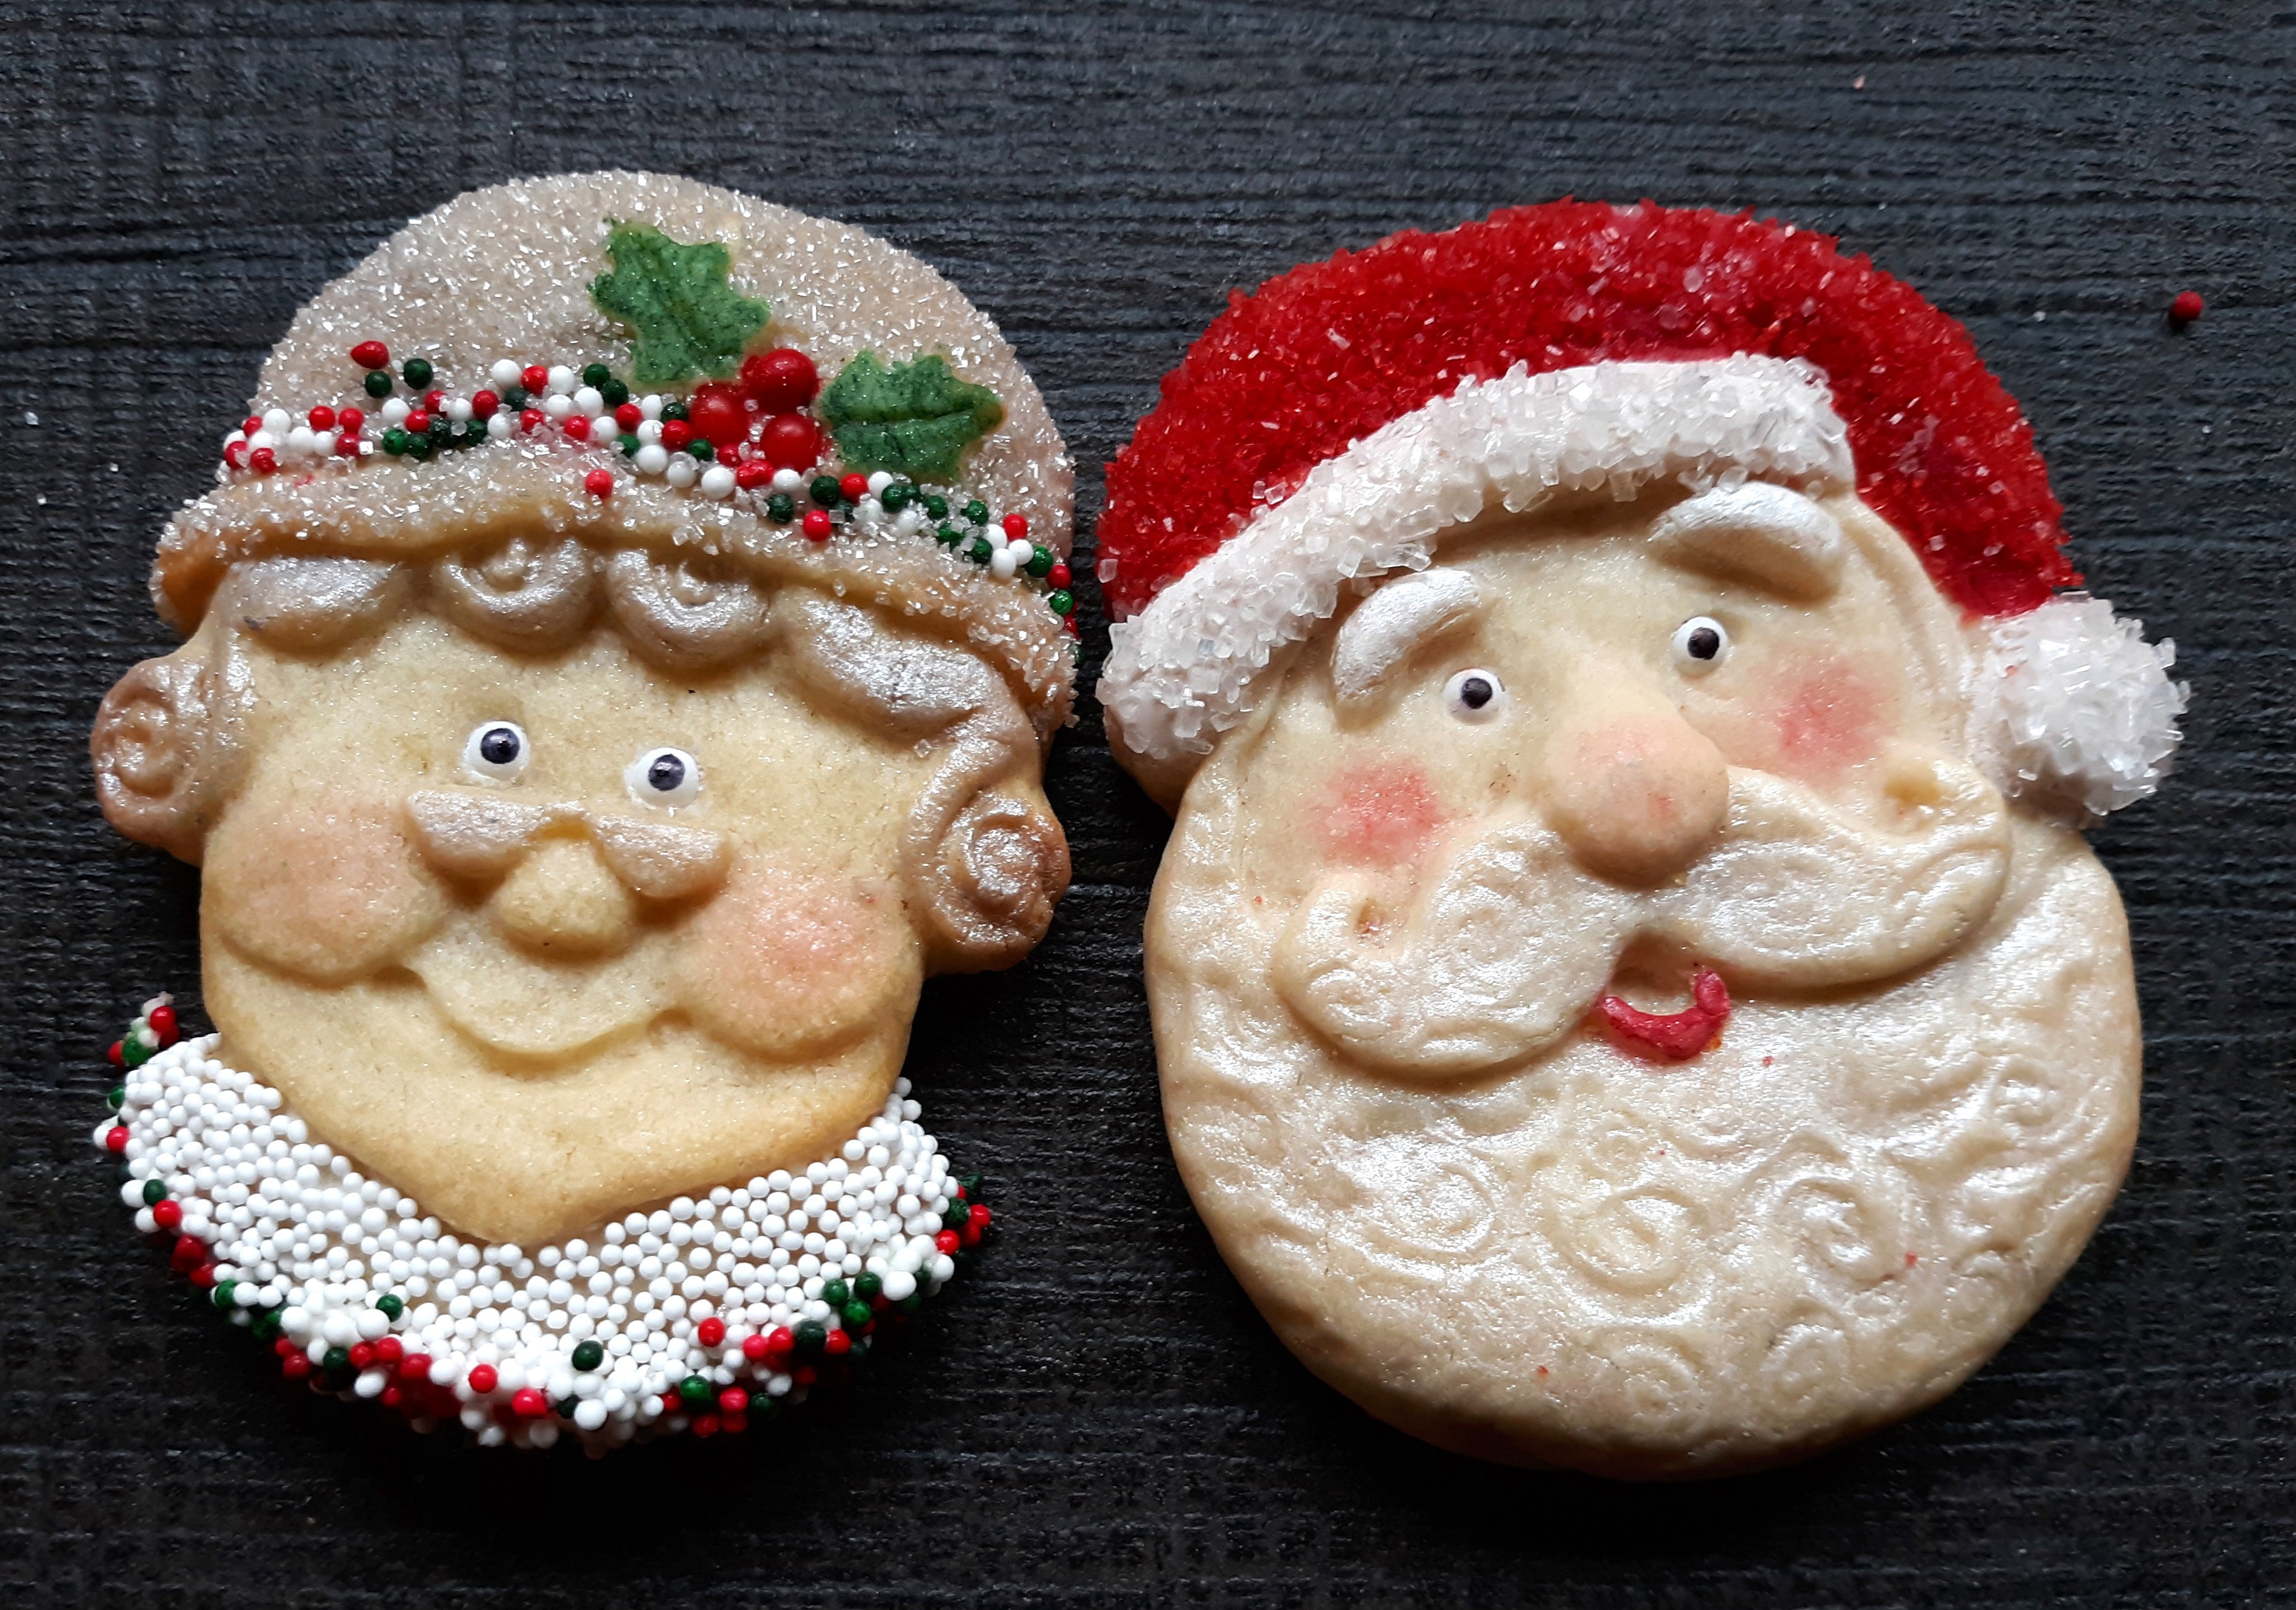 Mrs. Claus Silicone Cookie Mold